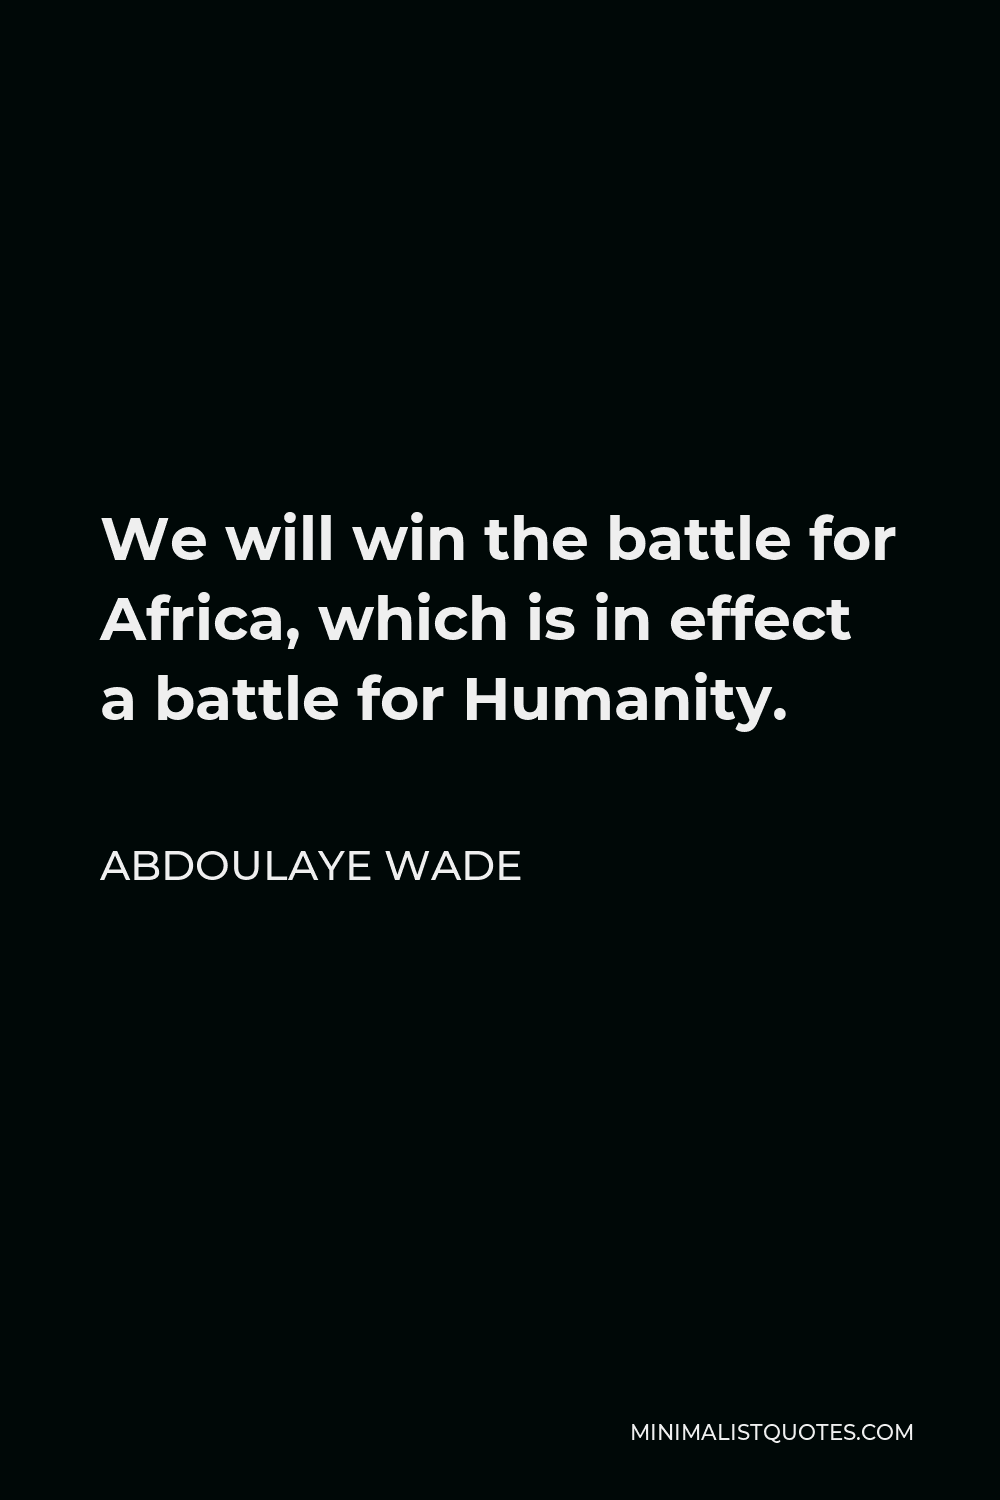 Abdoulaye Wade Quote - We will win the battle for Africa, which is in effect a battle for Humanity.